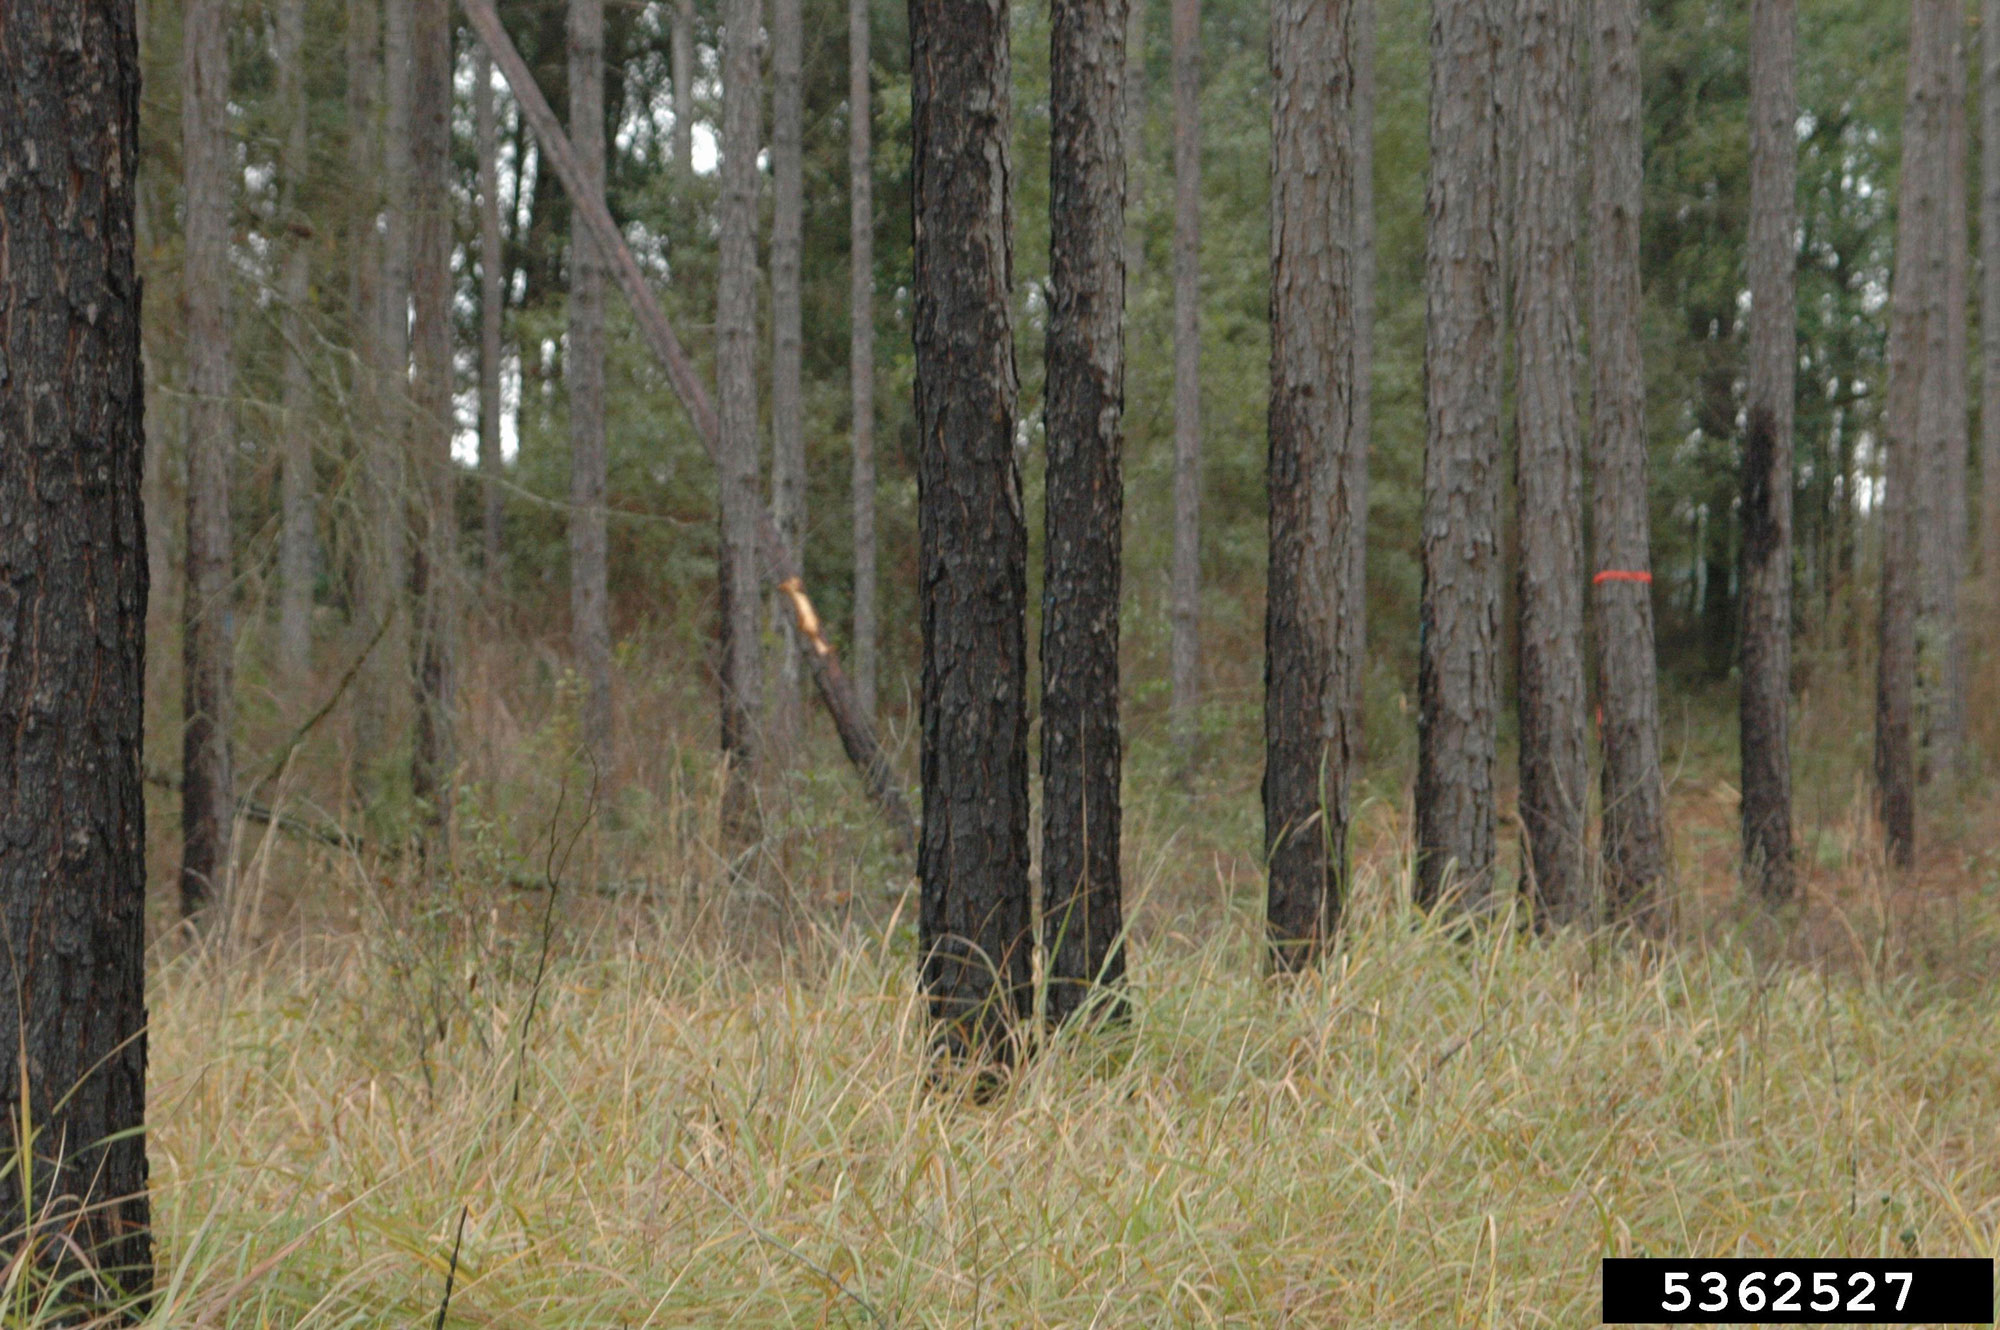 Photograph of a woodland that has been infested by cogongrass. The photo shows tall, yellowish-green grass growing among the bases of thin tree trunks. Some of the trunks have been scorched due to fire that burnt cogongrass in the past.